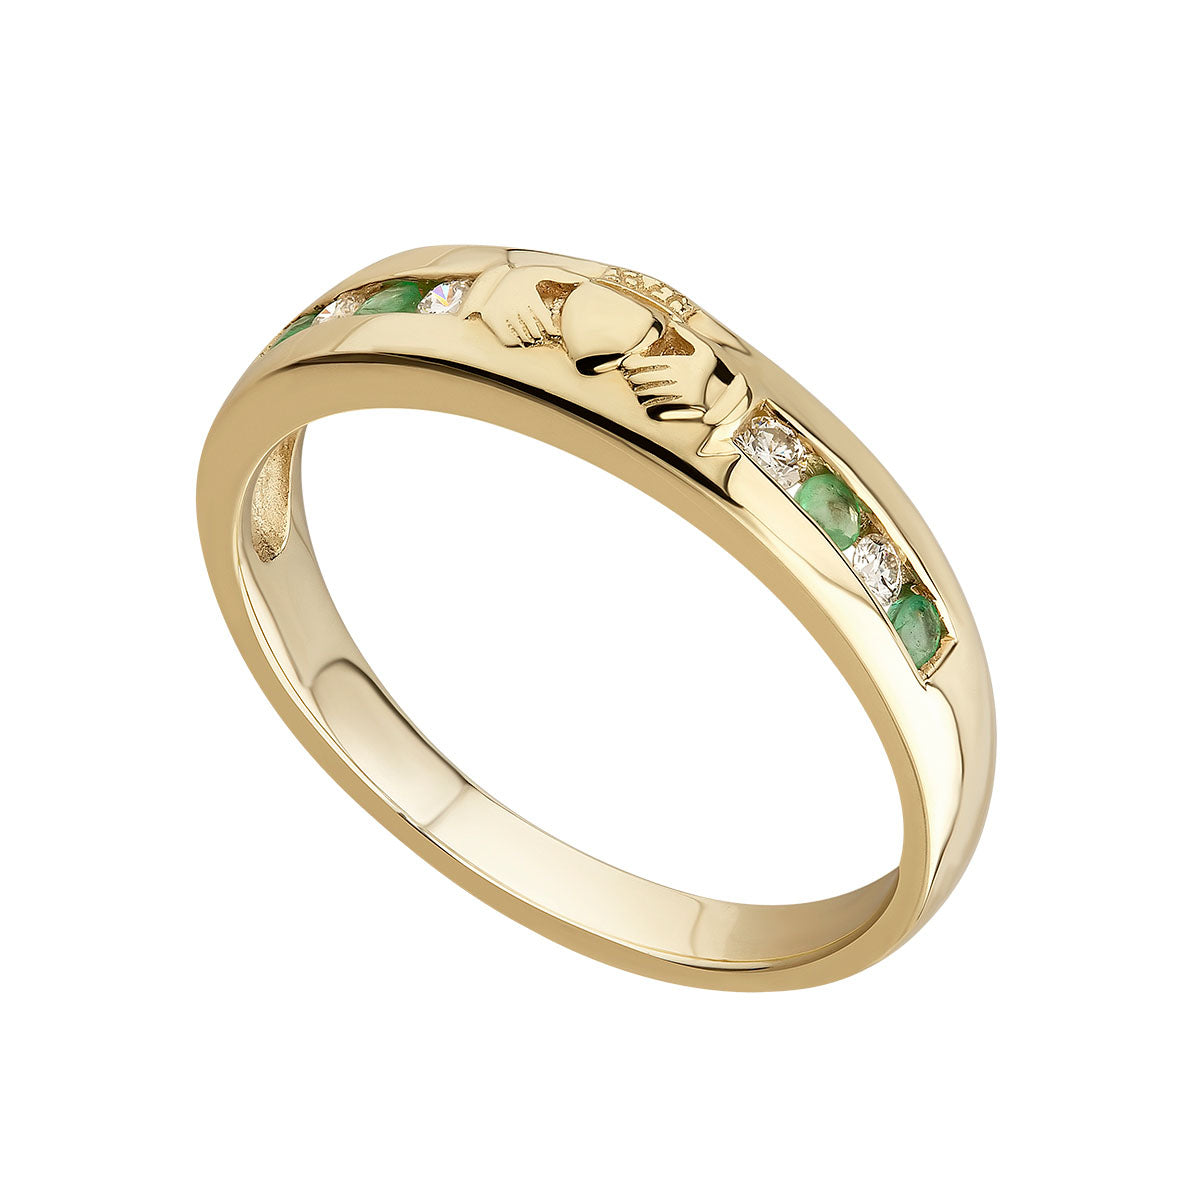 14K gold diamond and emerald claddagh eternity ring s2374 from Solvar